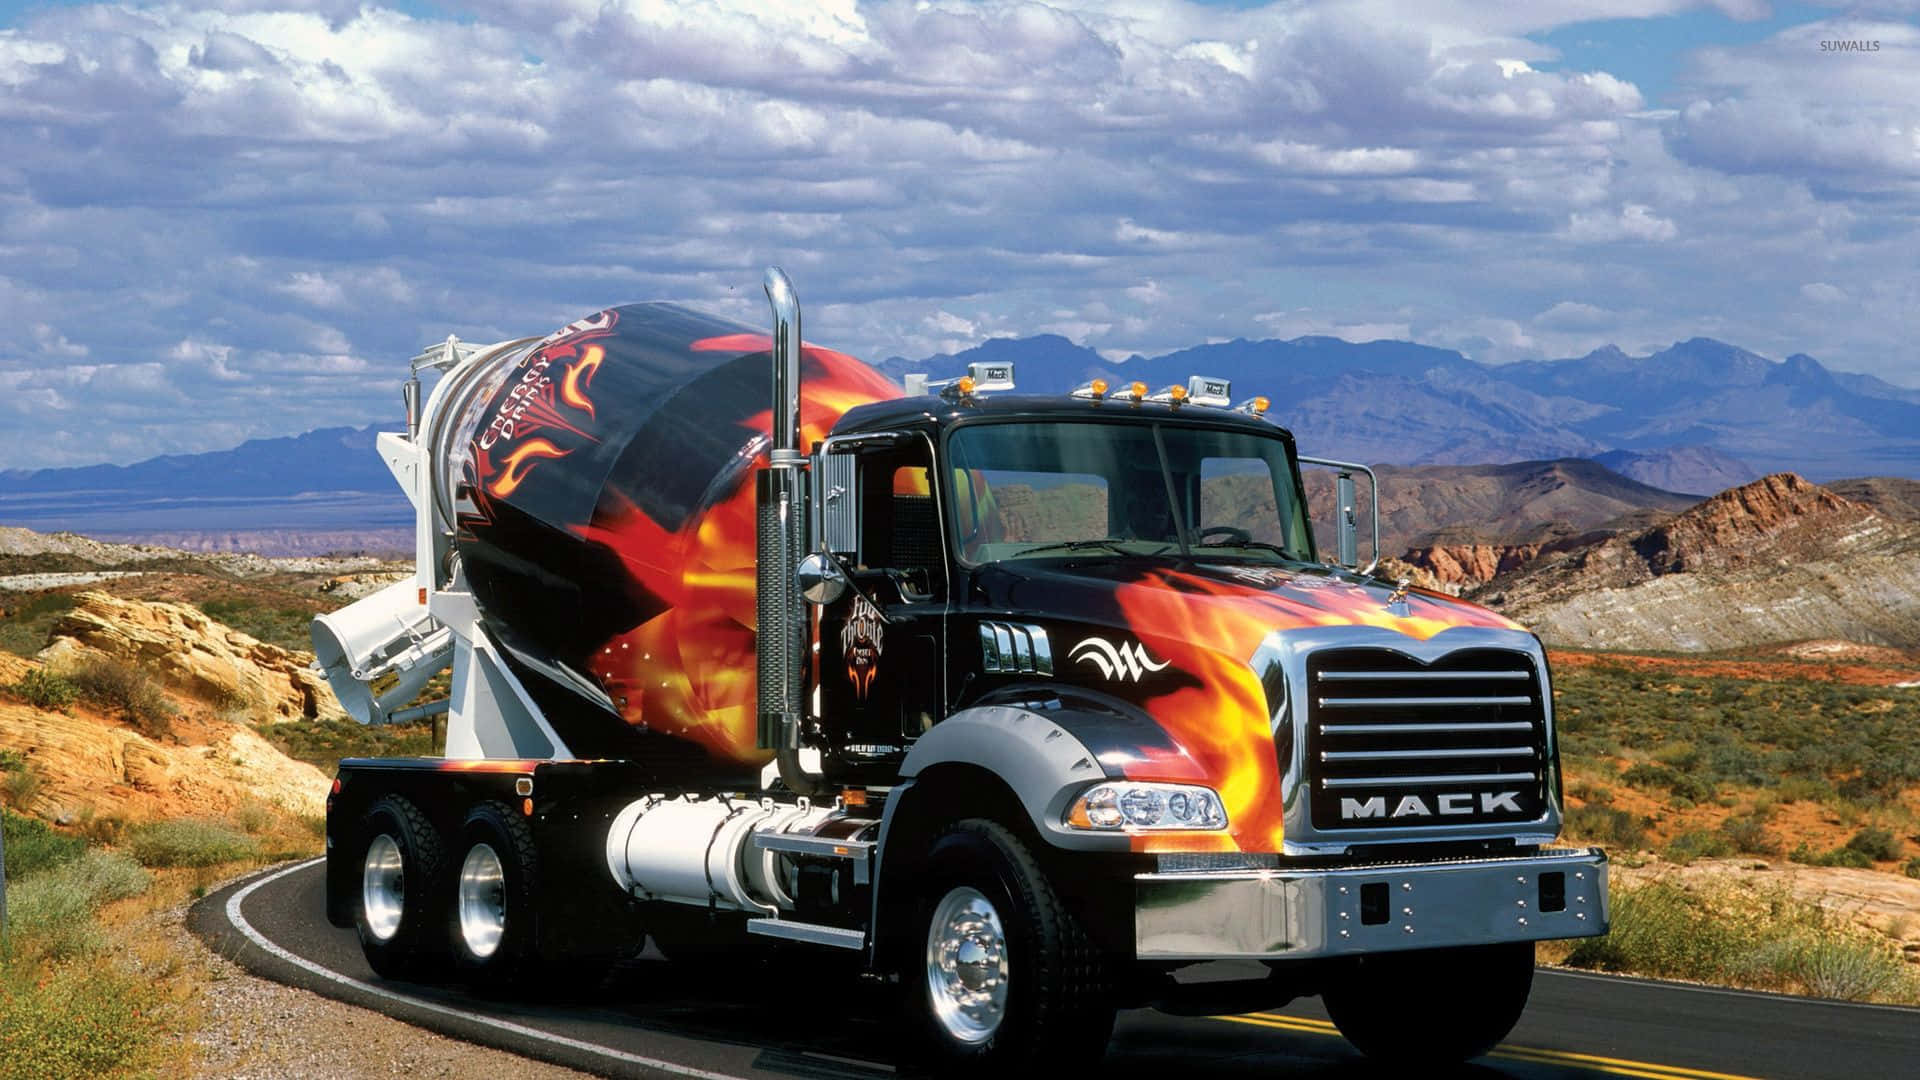 A Large Truck With A Flame On It